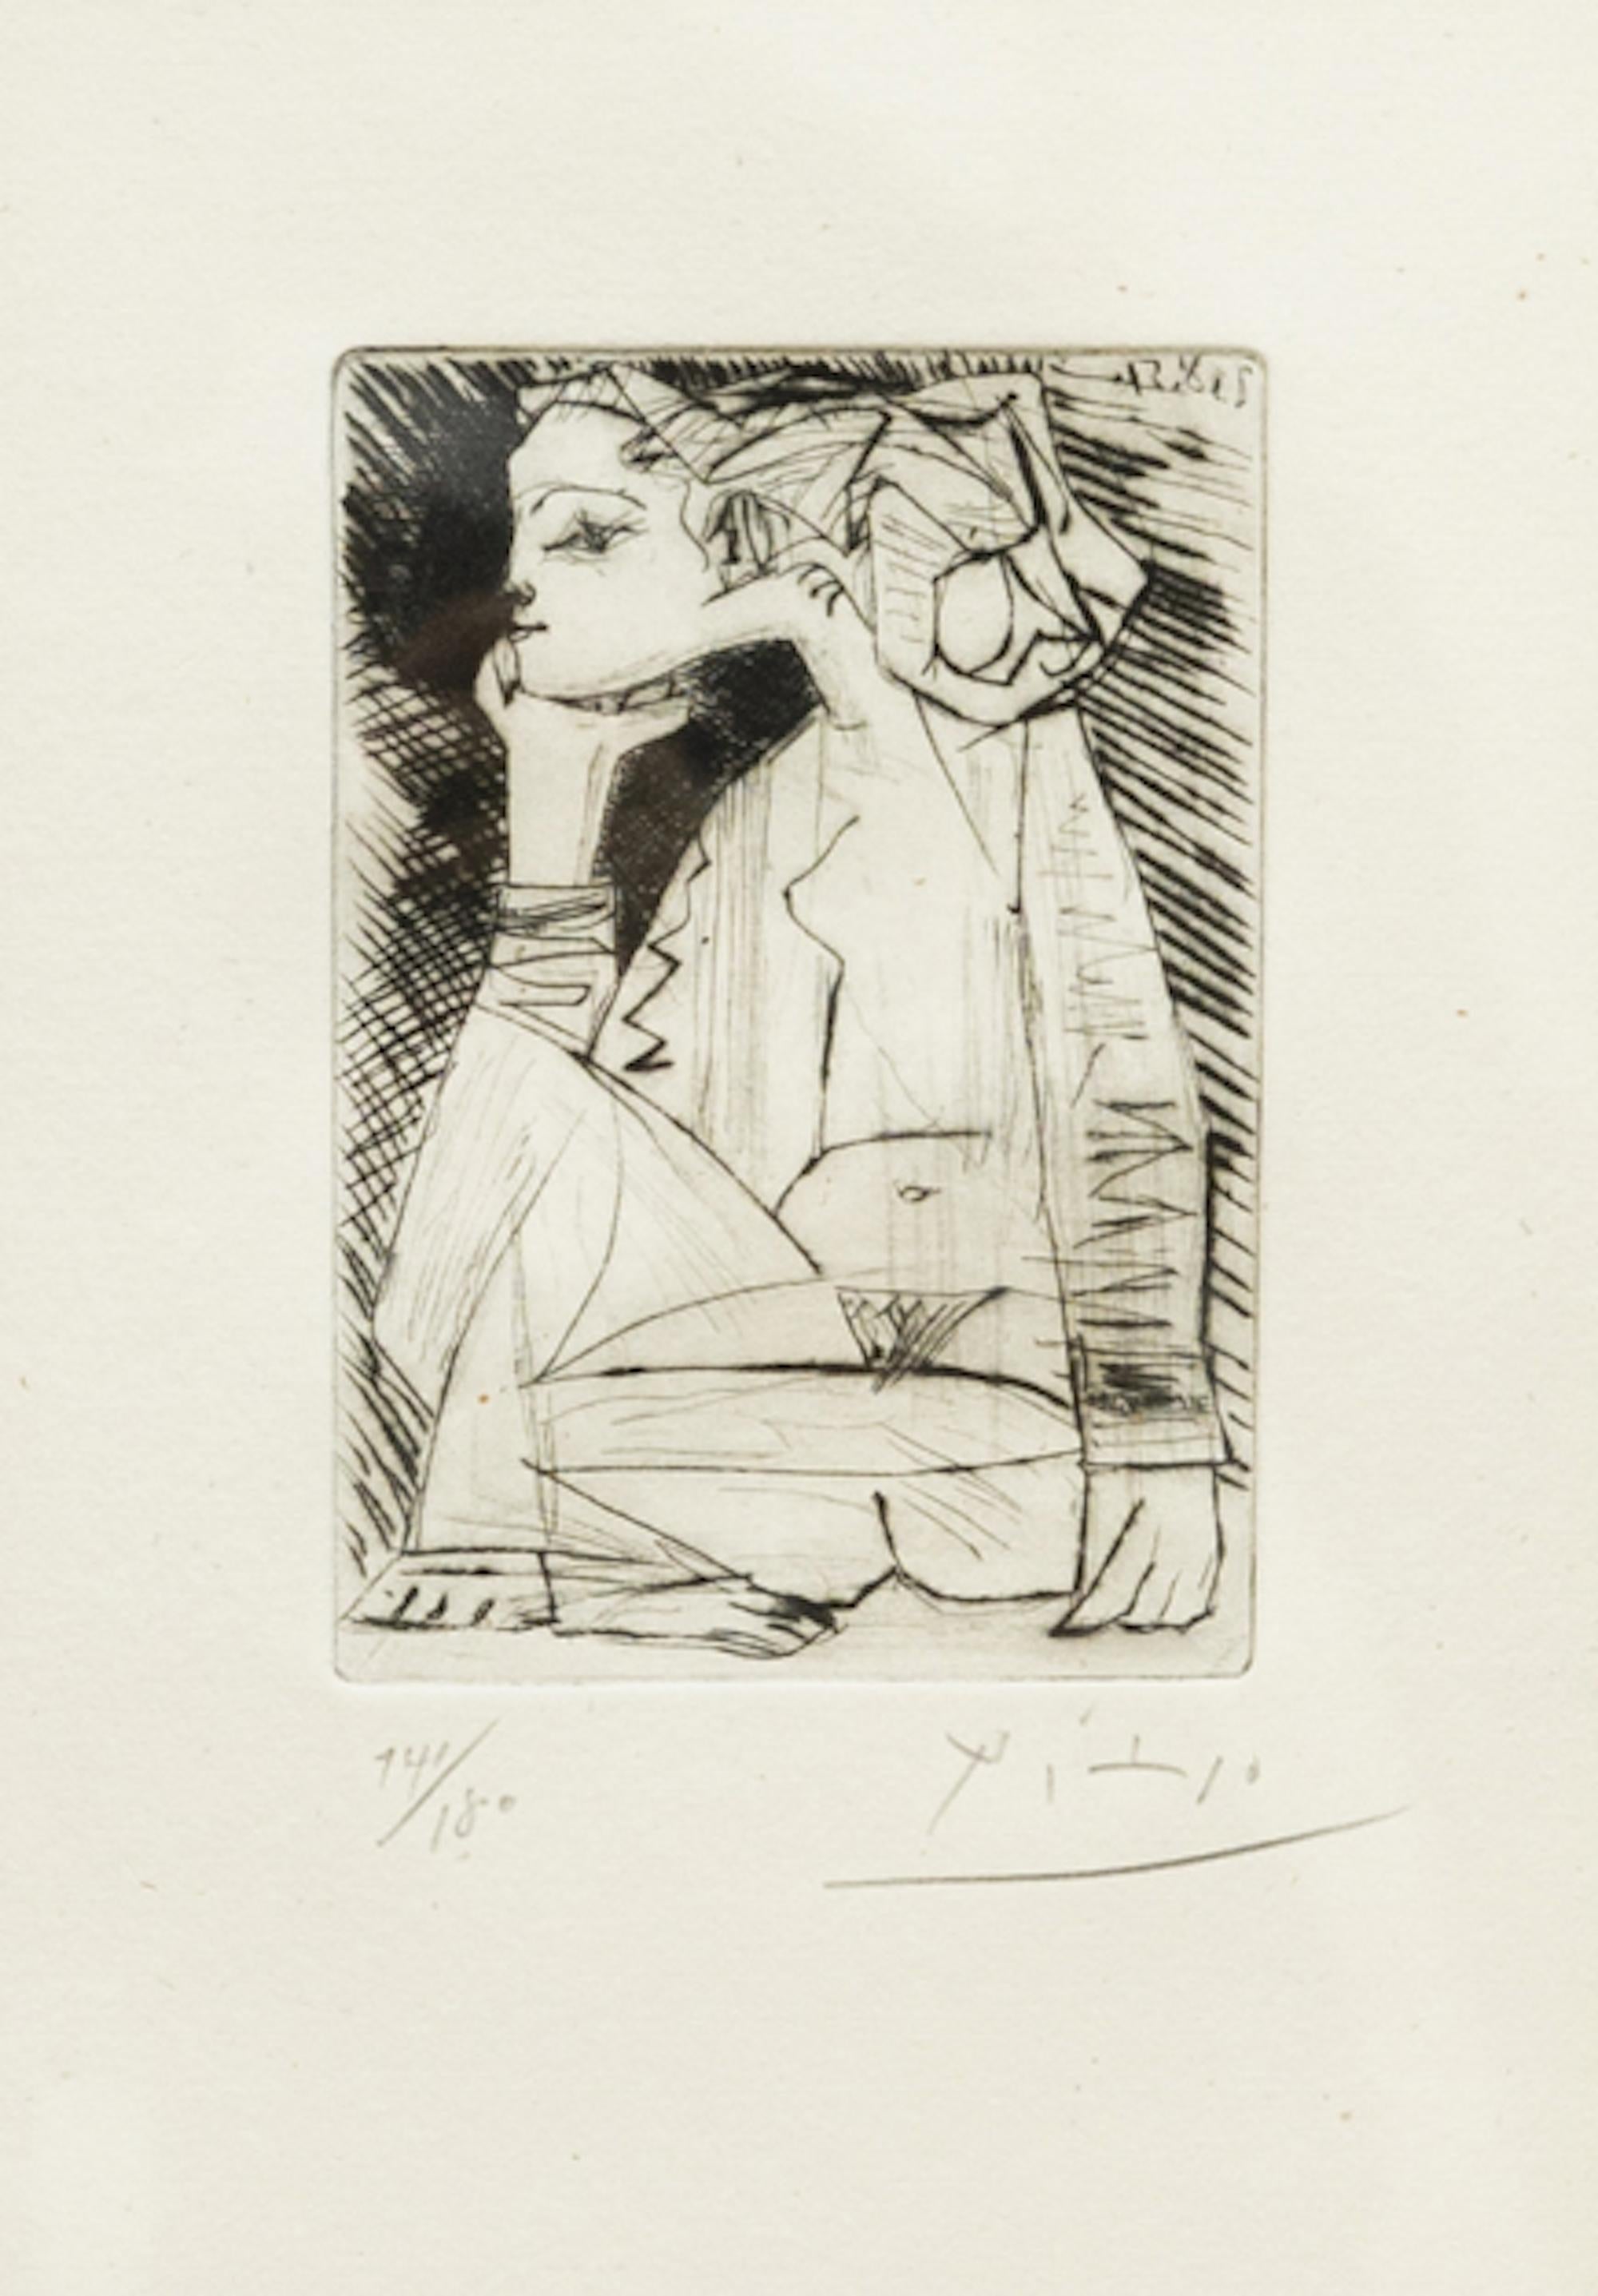 Etching by Pablo Picasso, 